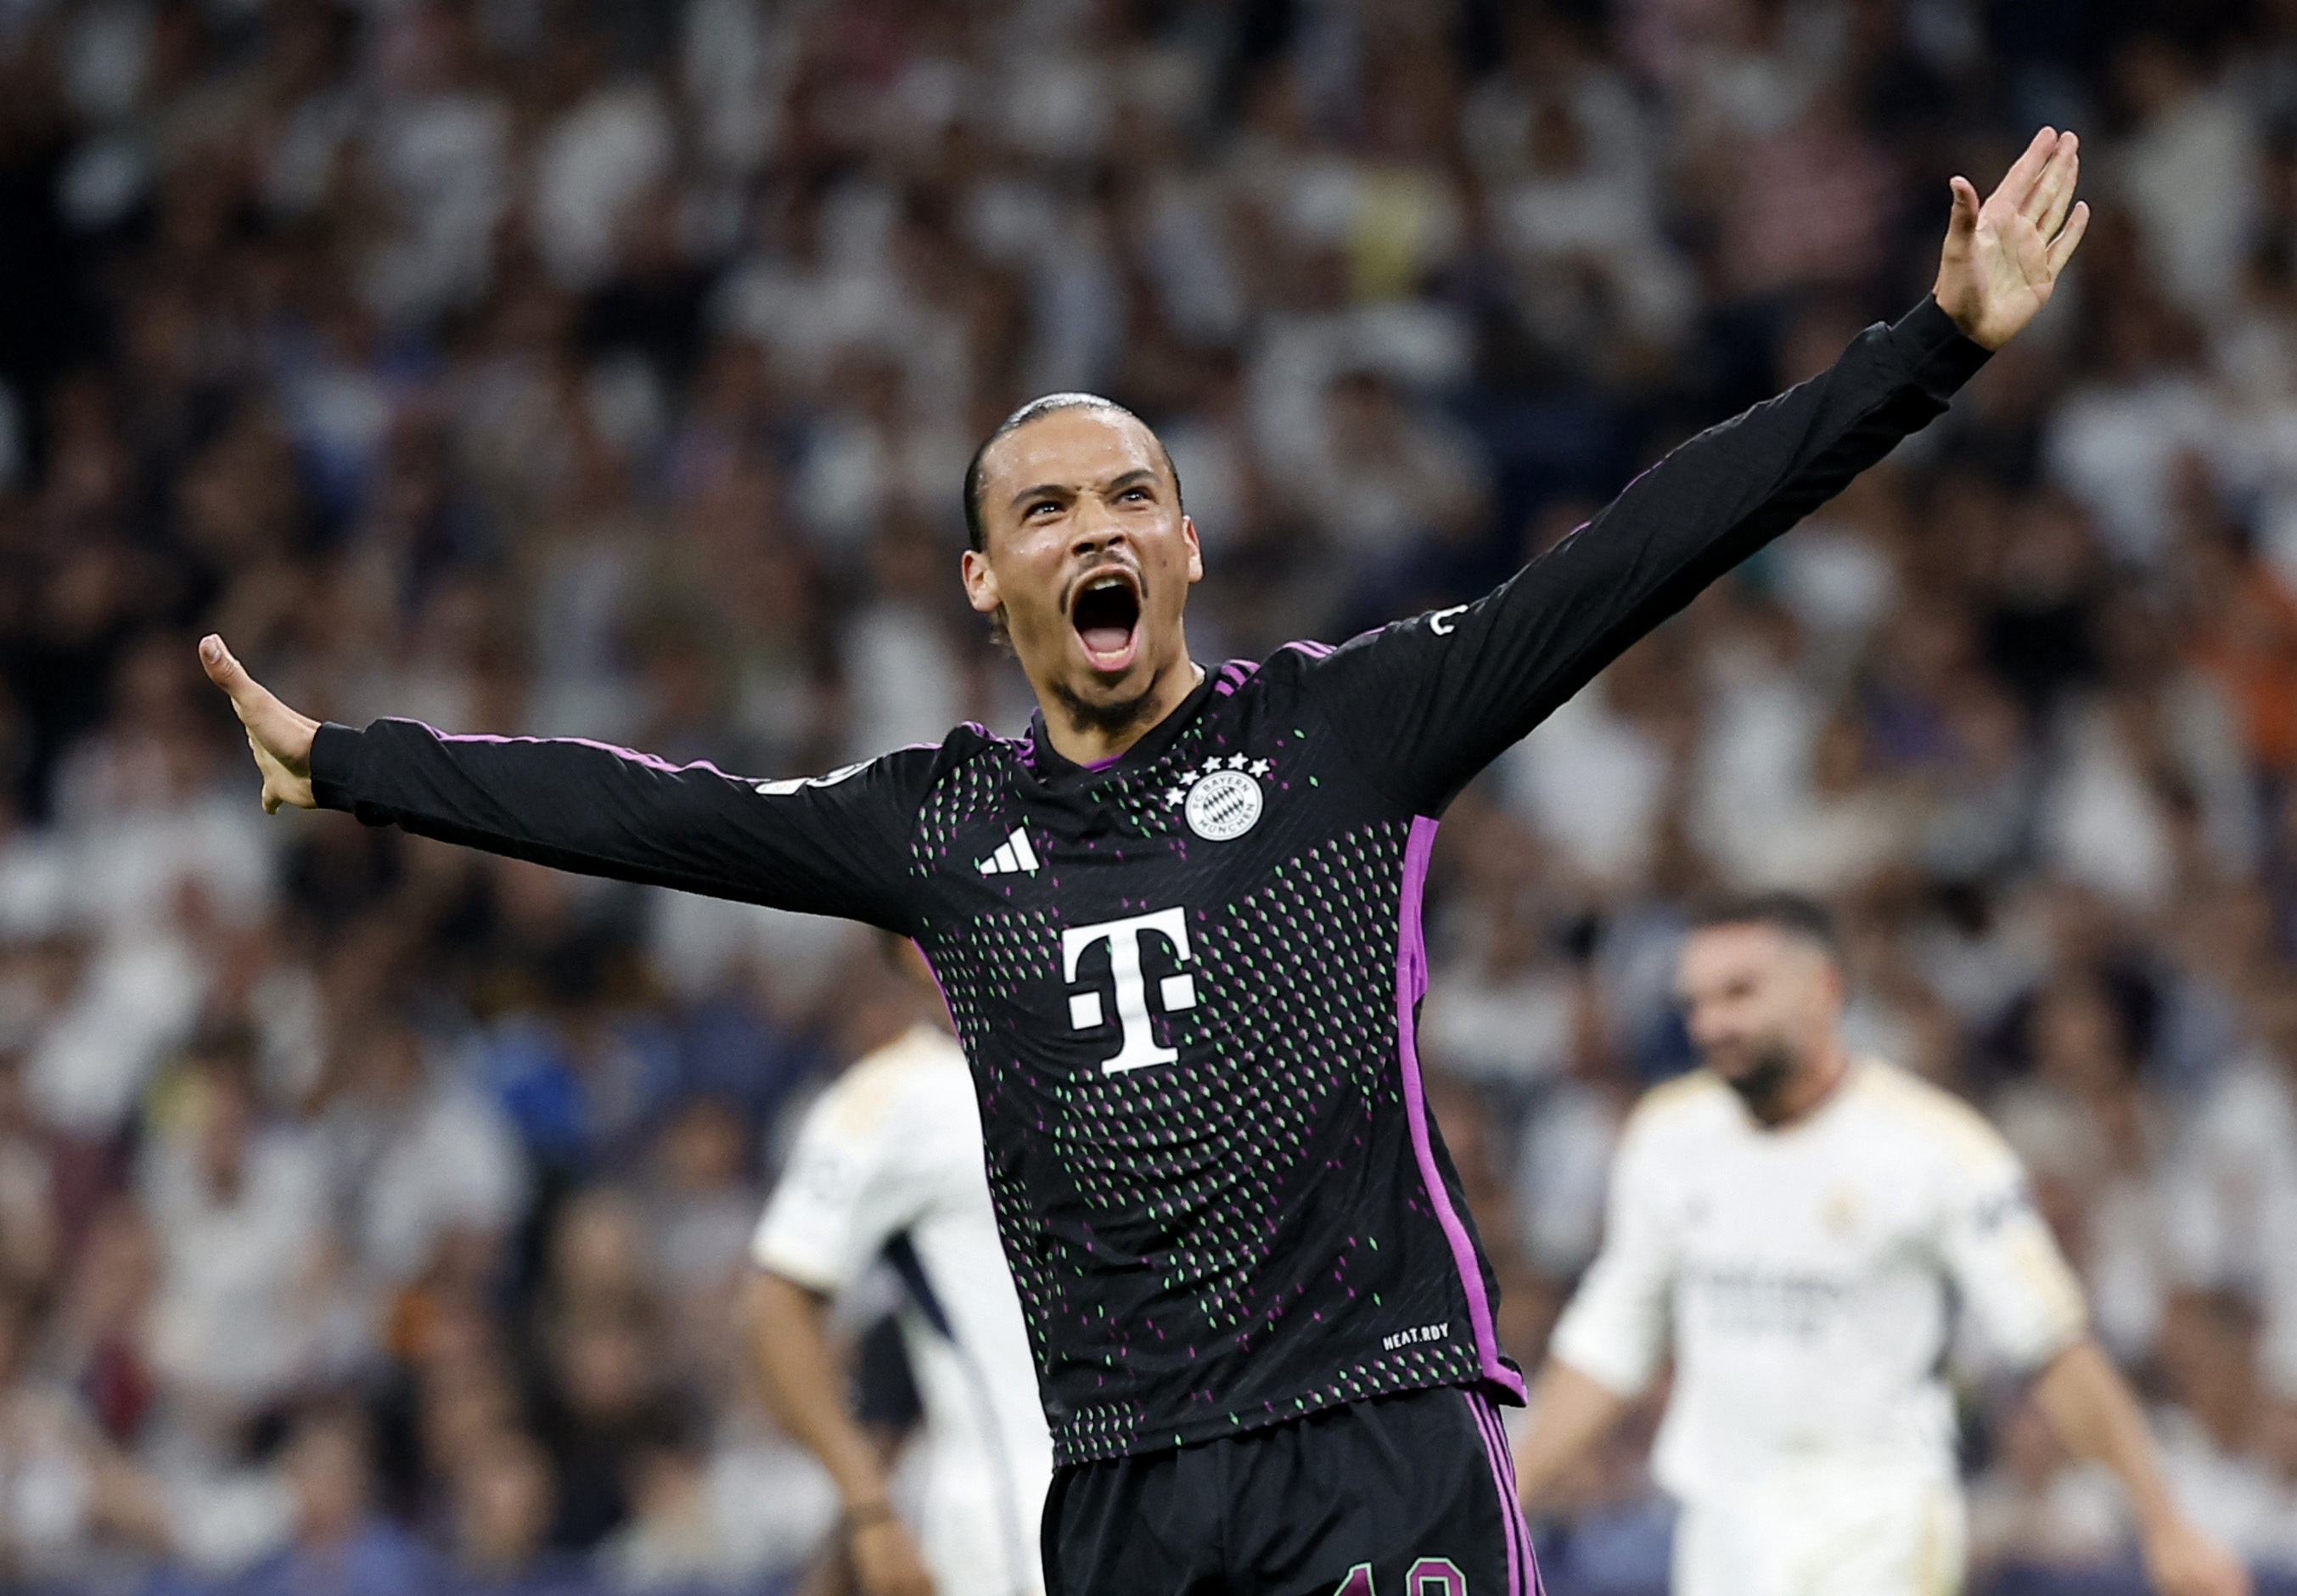 Real Madrid stuns Bayern Munich late to reach Champions League final but match marred by controversial decision - Real Madrid's key moments in the semi-final match